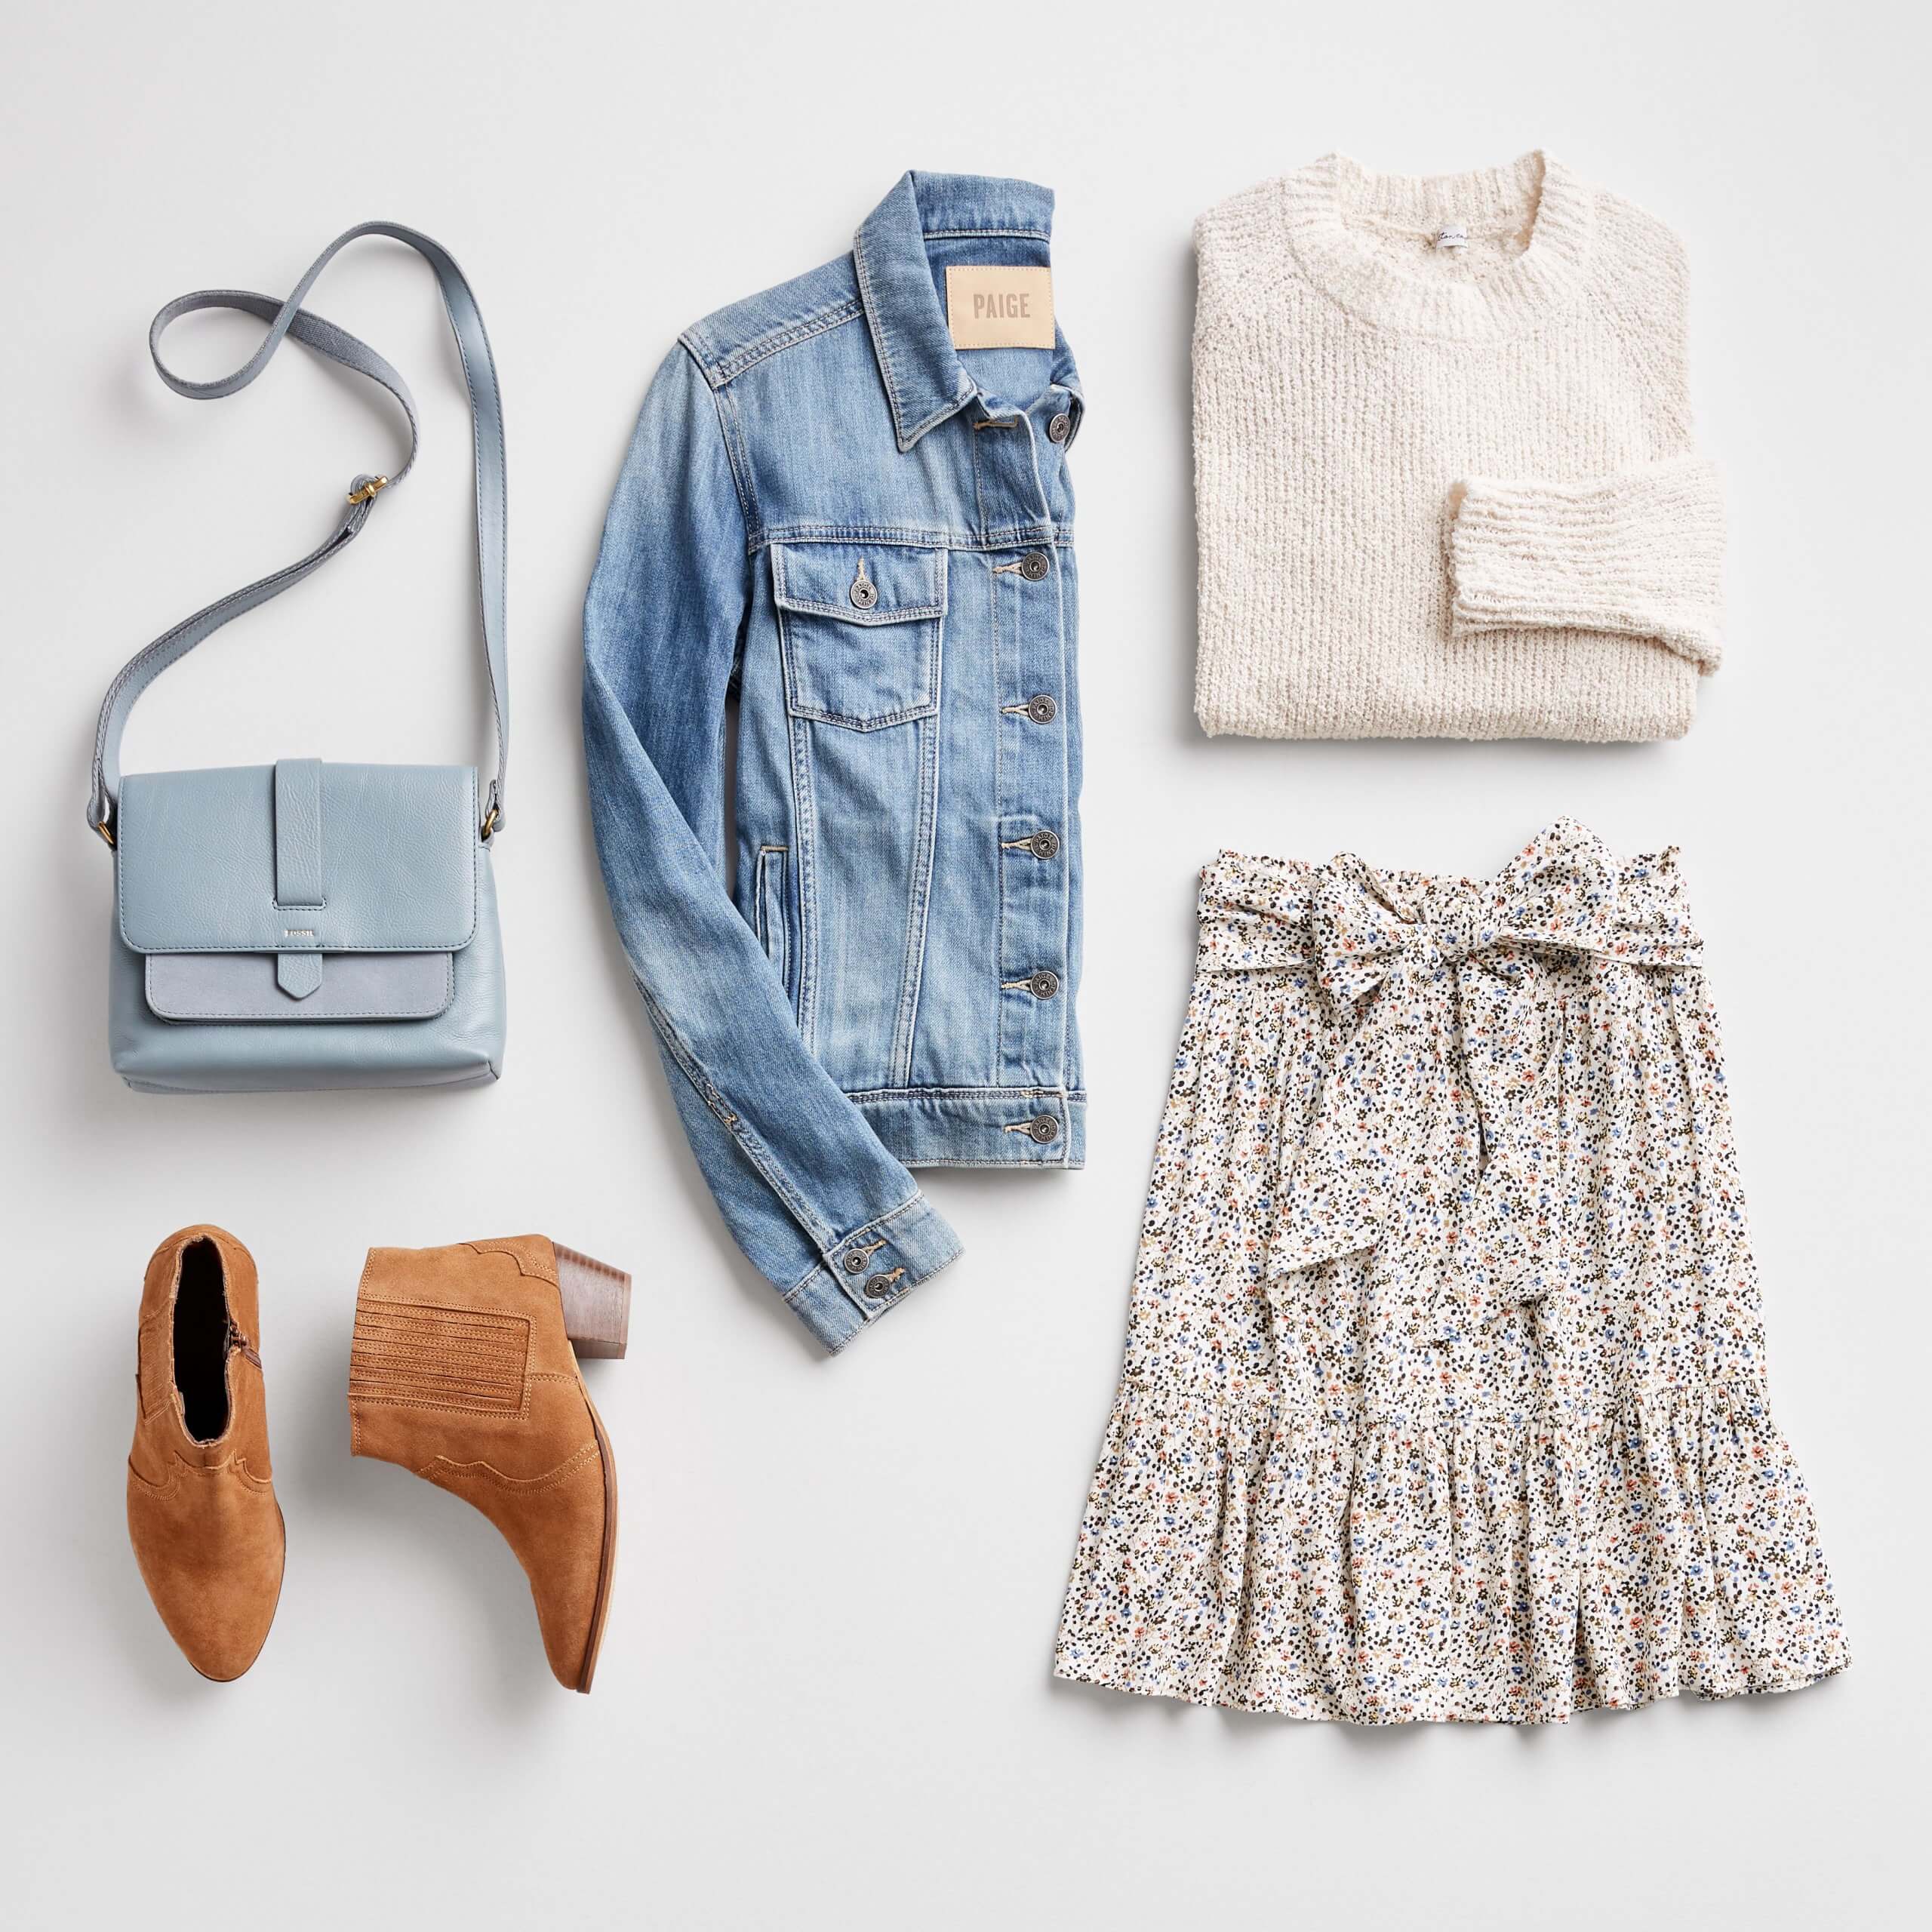 Stitch Fix women’s jean jacket outfit laydown with light blue crossbody bag, blue denim jacket, off-white knit crewneck sweater, brown heeled booties and white and blue micro floral skirt with a bow belt.